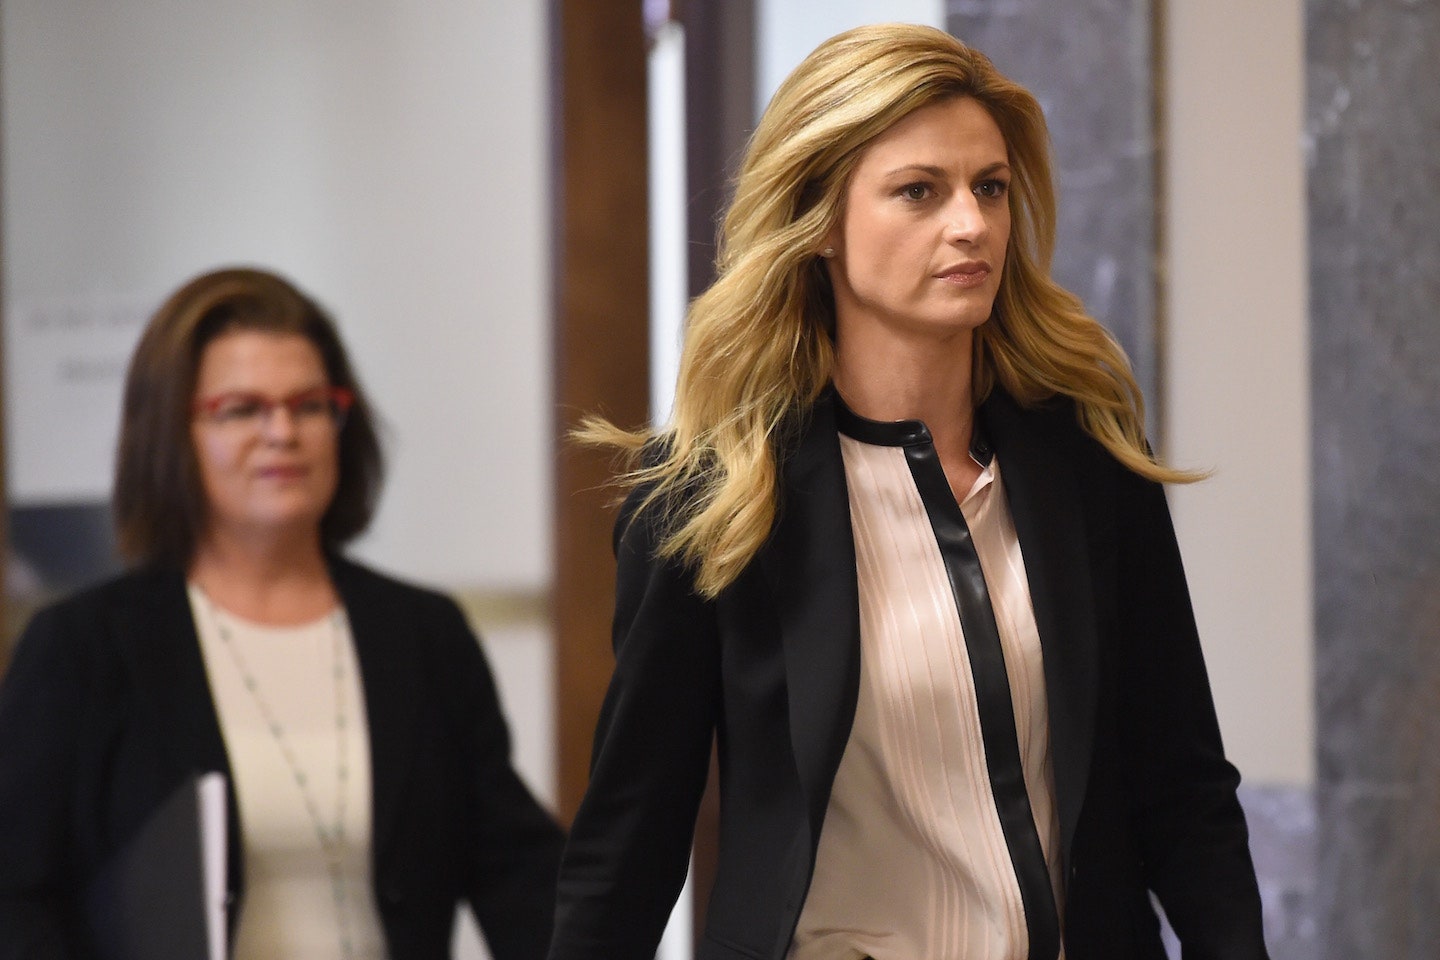 deepak sharma r recommends erin andrews leaked tape pic